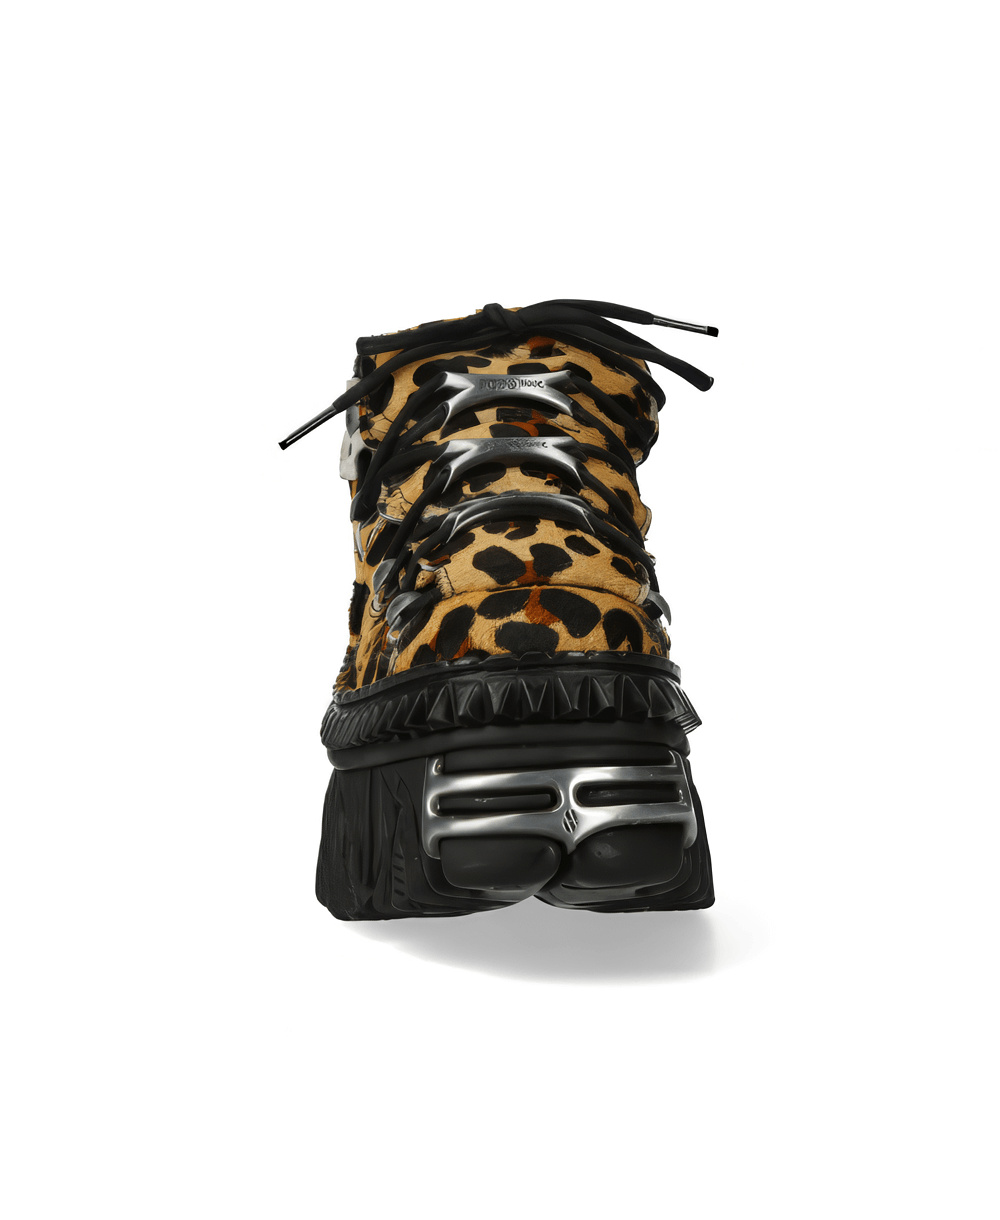 NEW ROCK Leopard Print Rock Ankle Boots with Edge